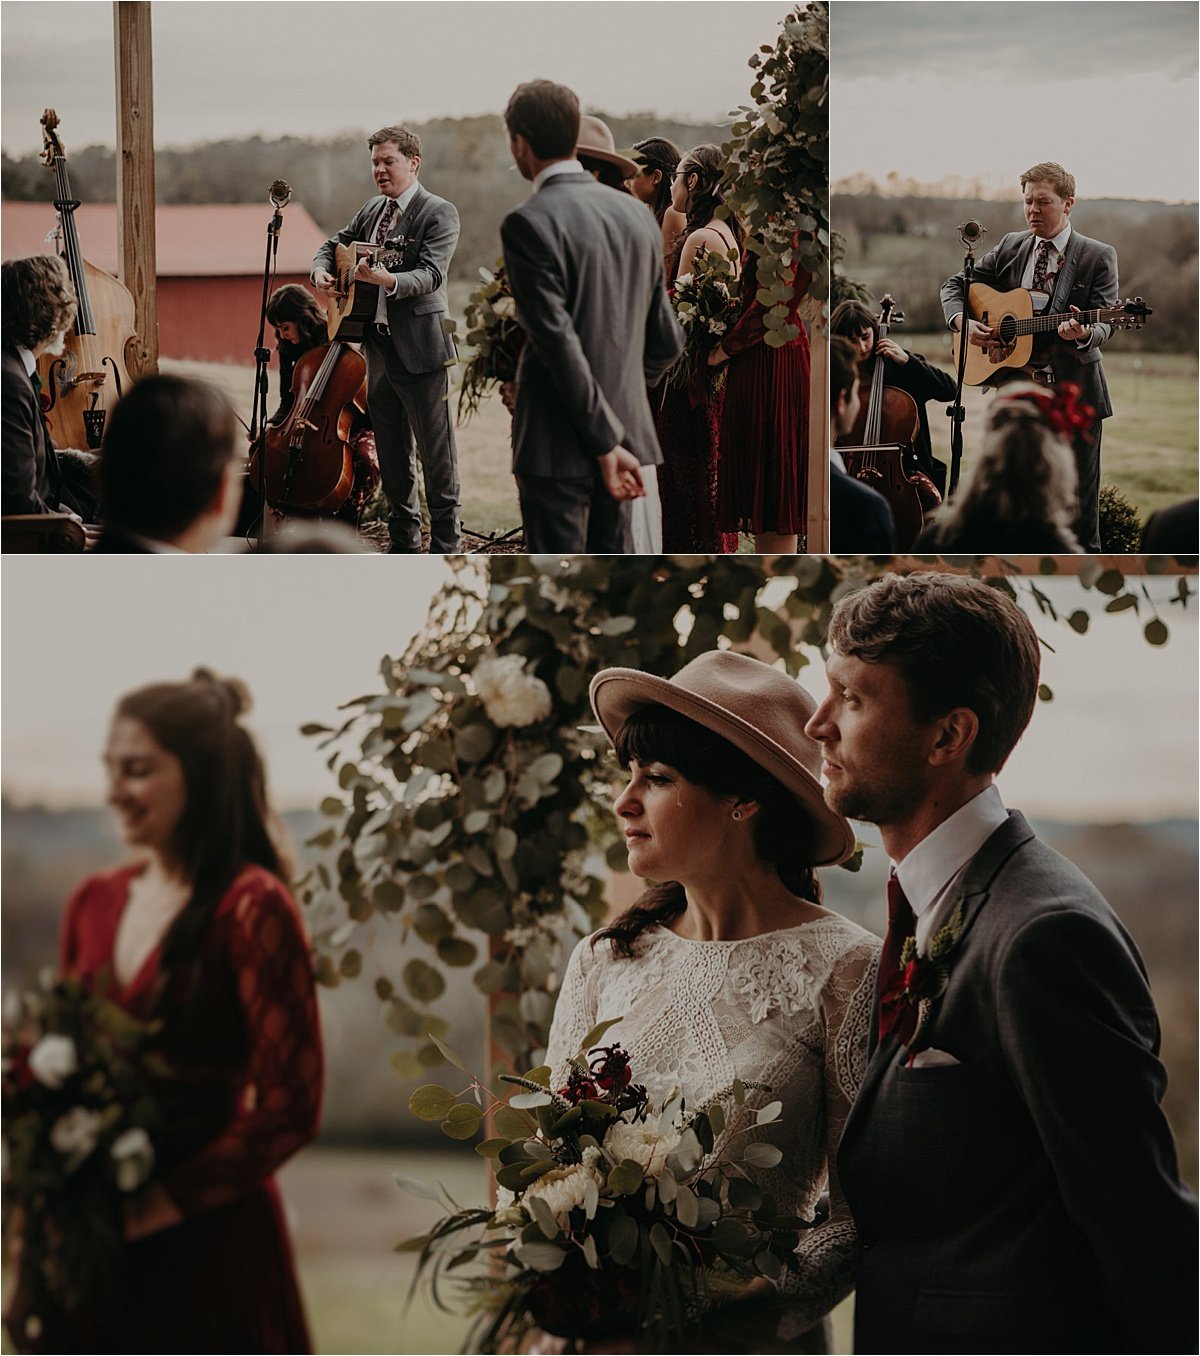  This musicians’ wedding including plenty of musical performances by their family and friends. The bride has a single tear as she looks on during the ceremony. 